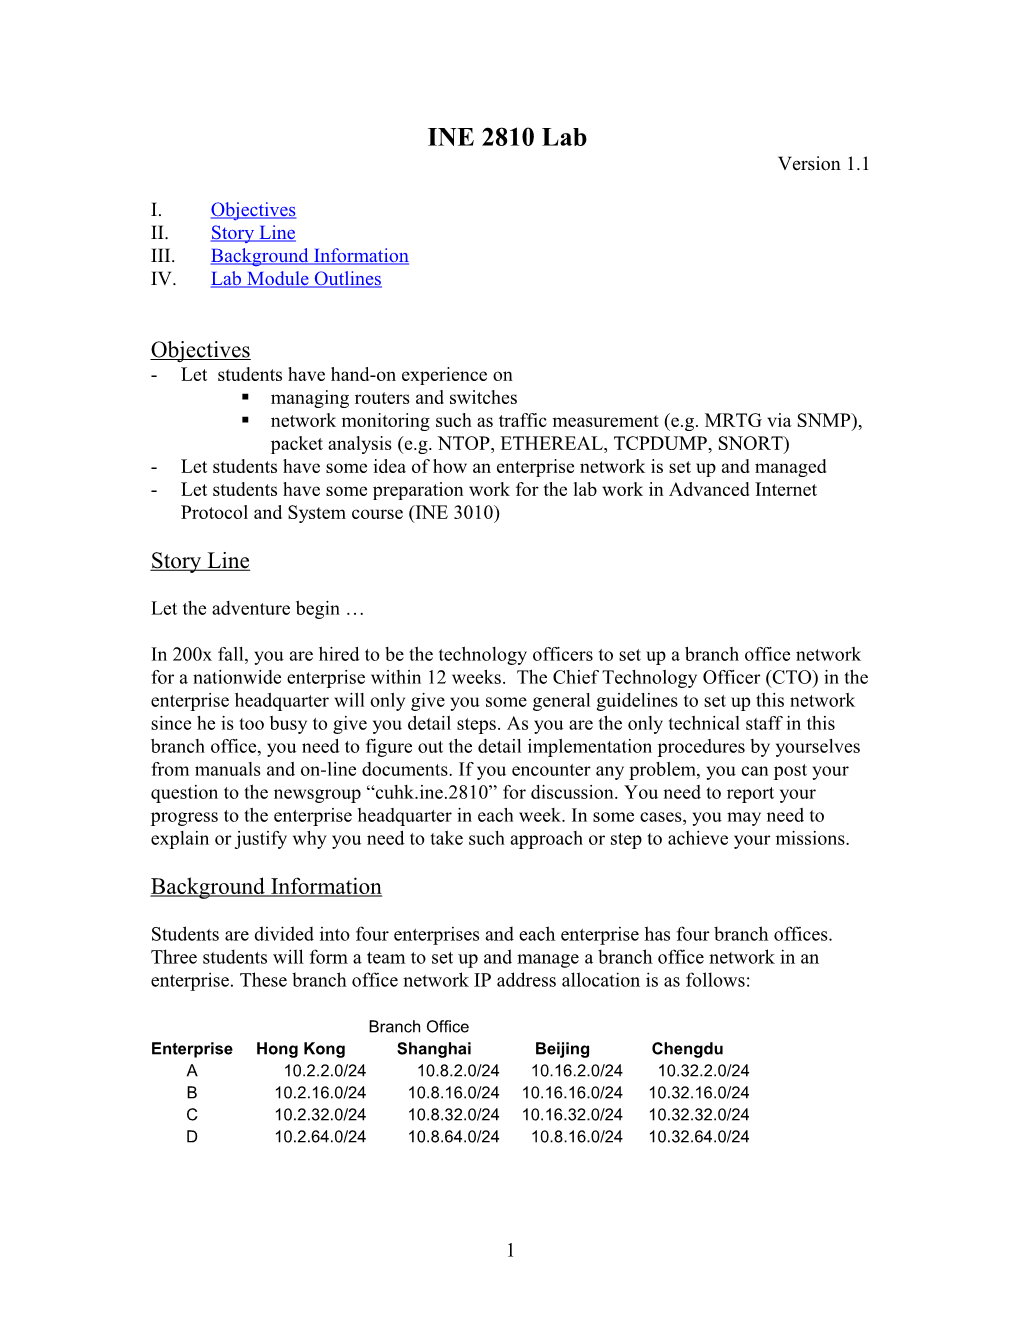 INE 2801 Lab Module Outlines